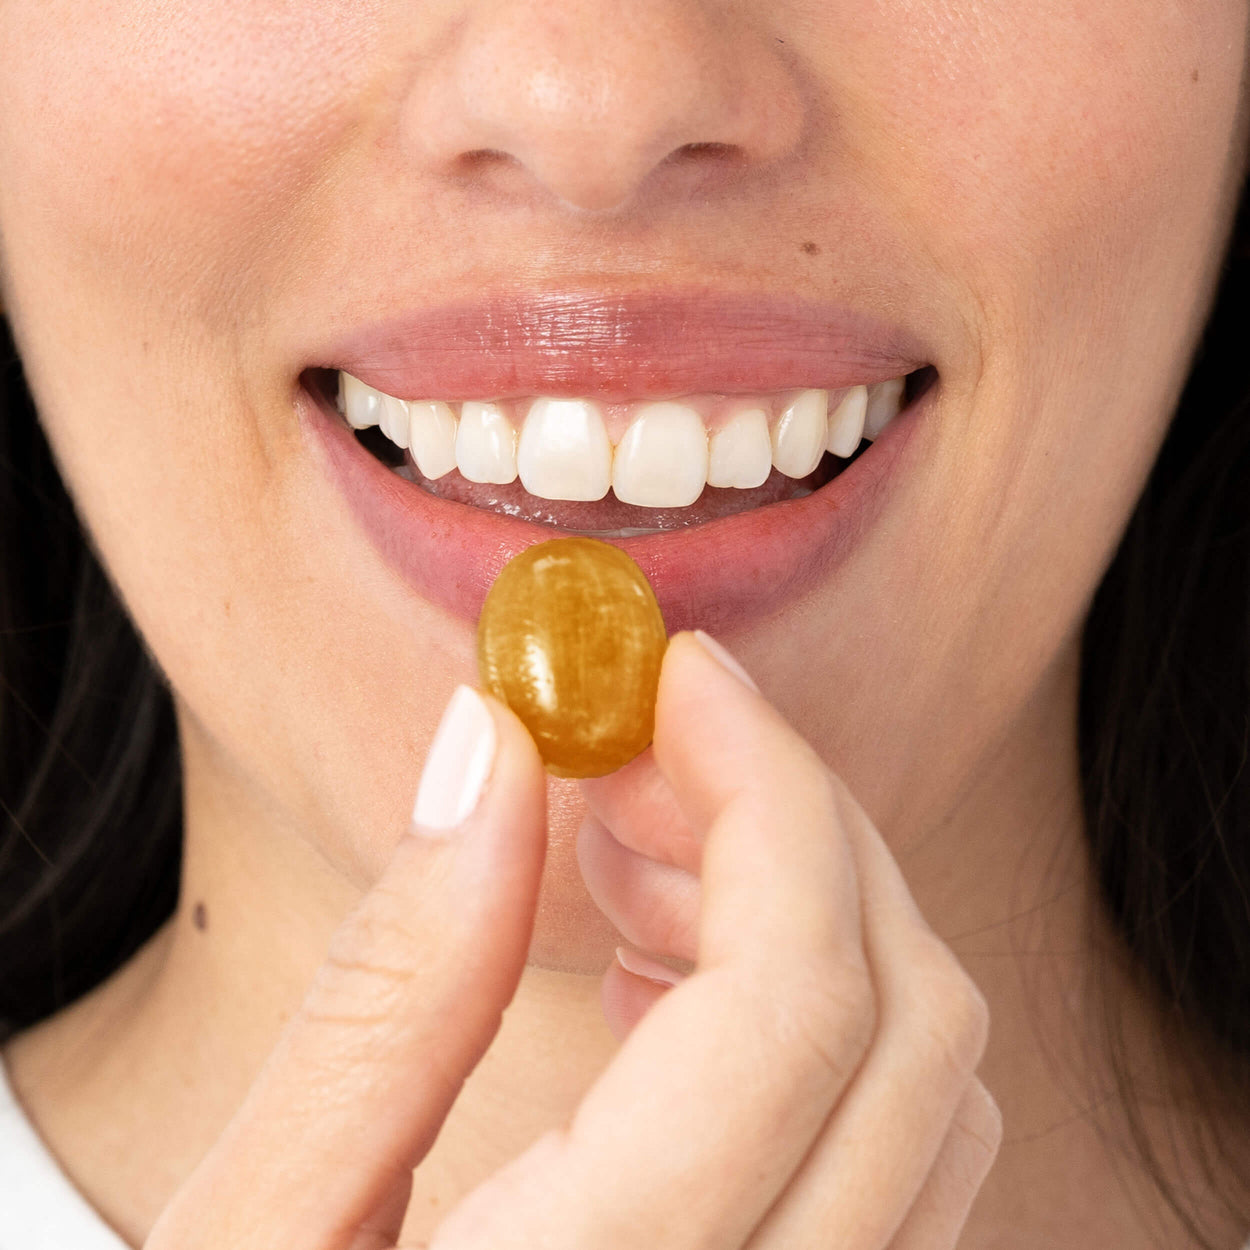 Woman holding kindroot lozenge next to mouth